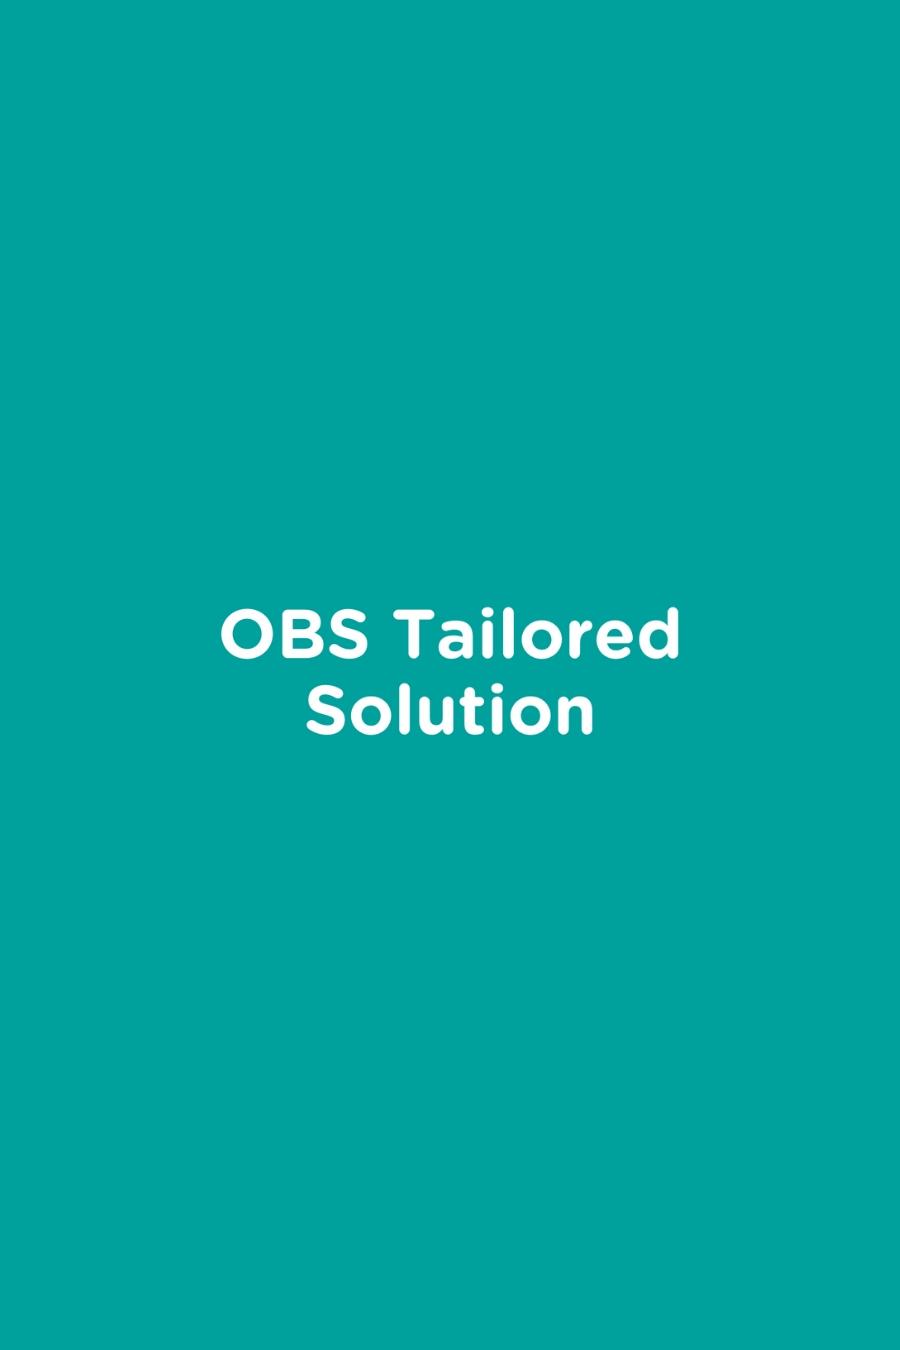 OBS Tailored Solution